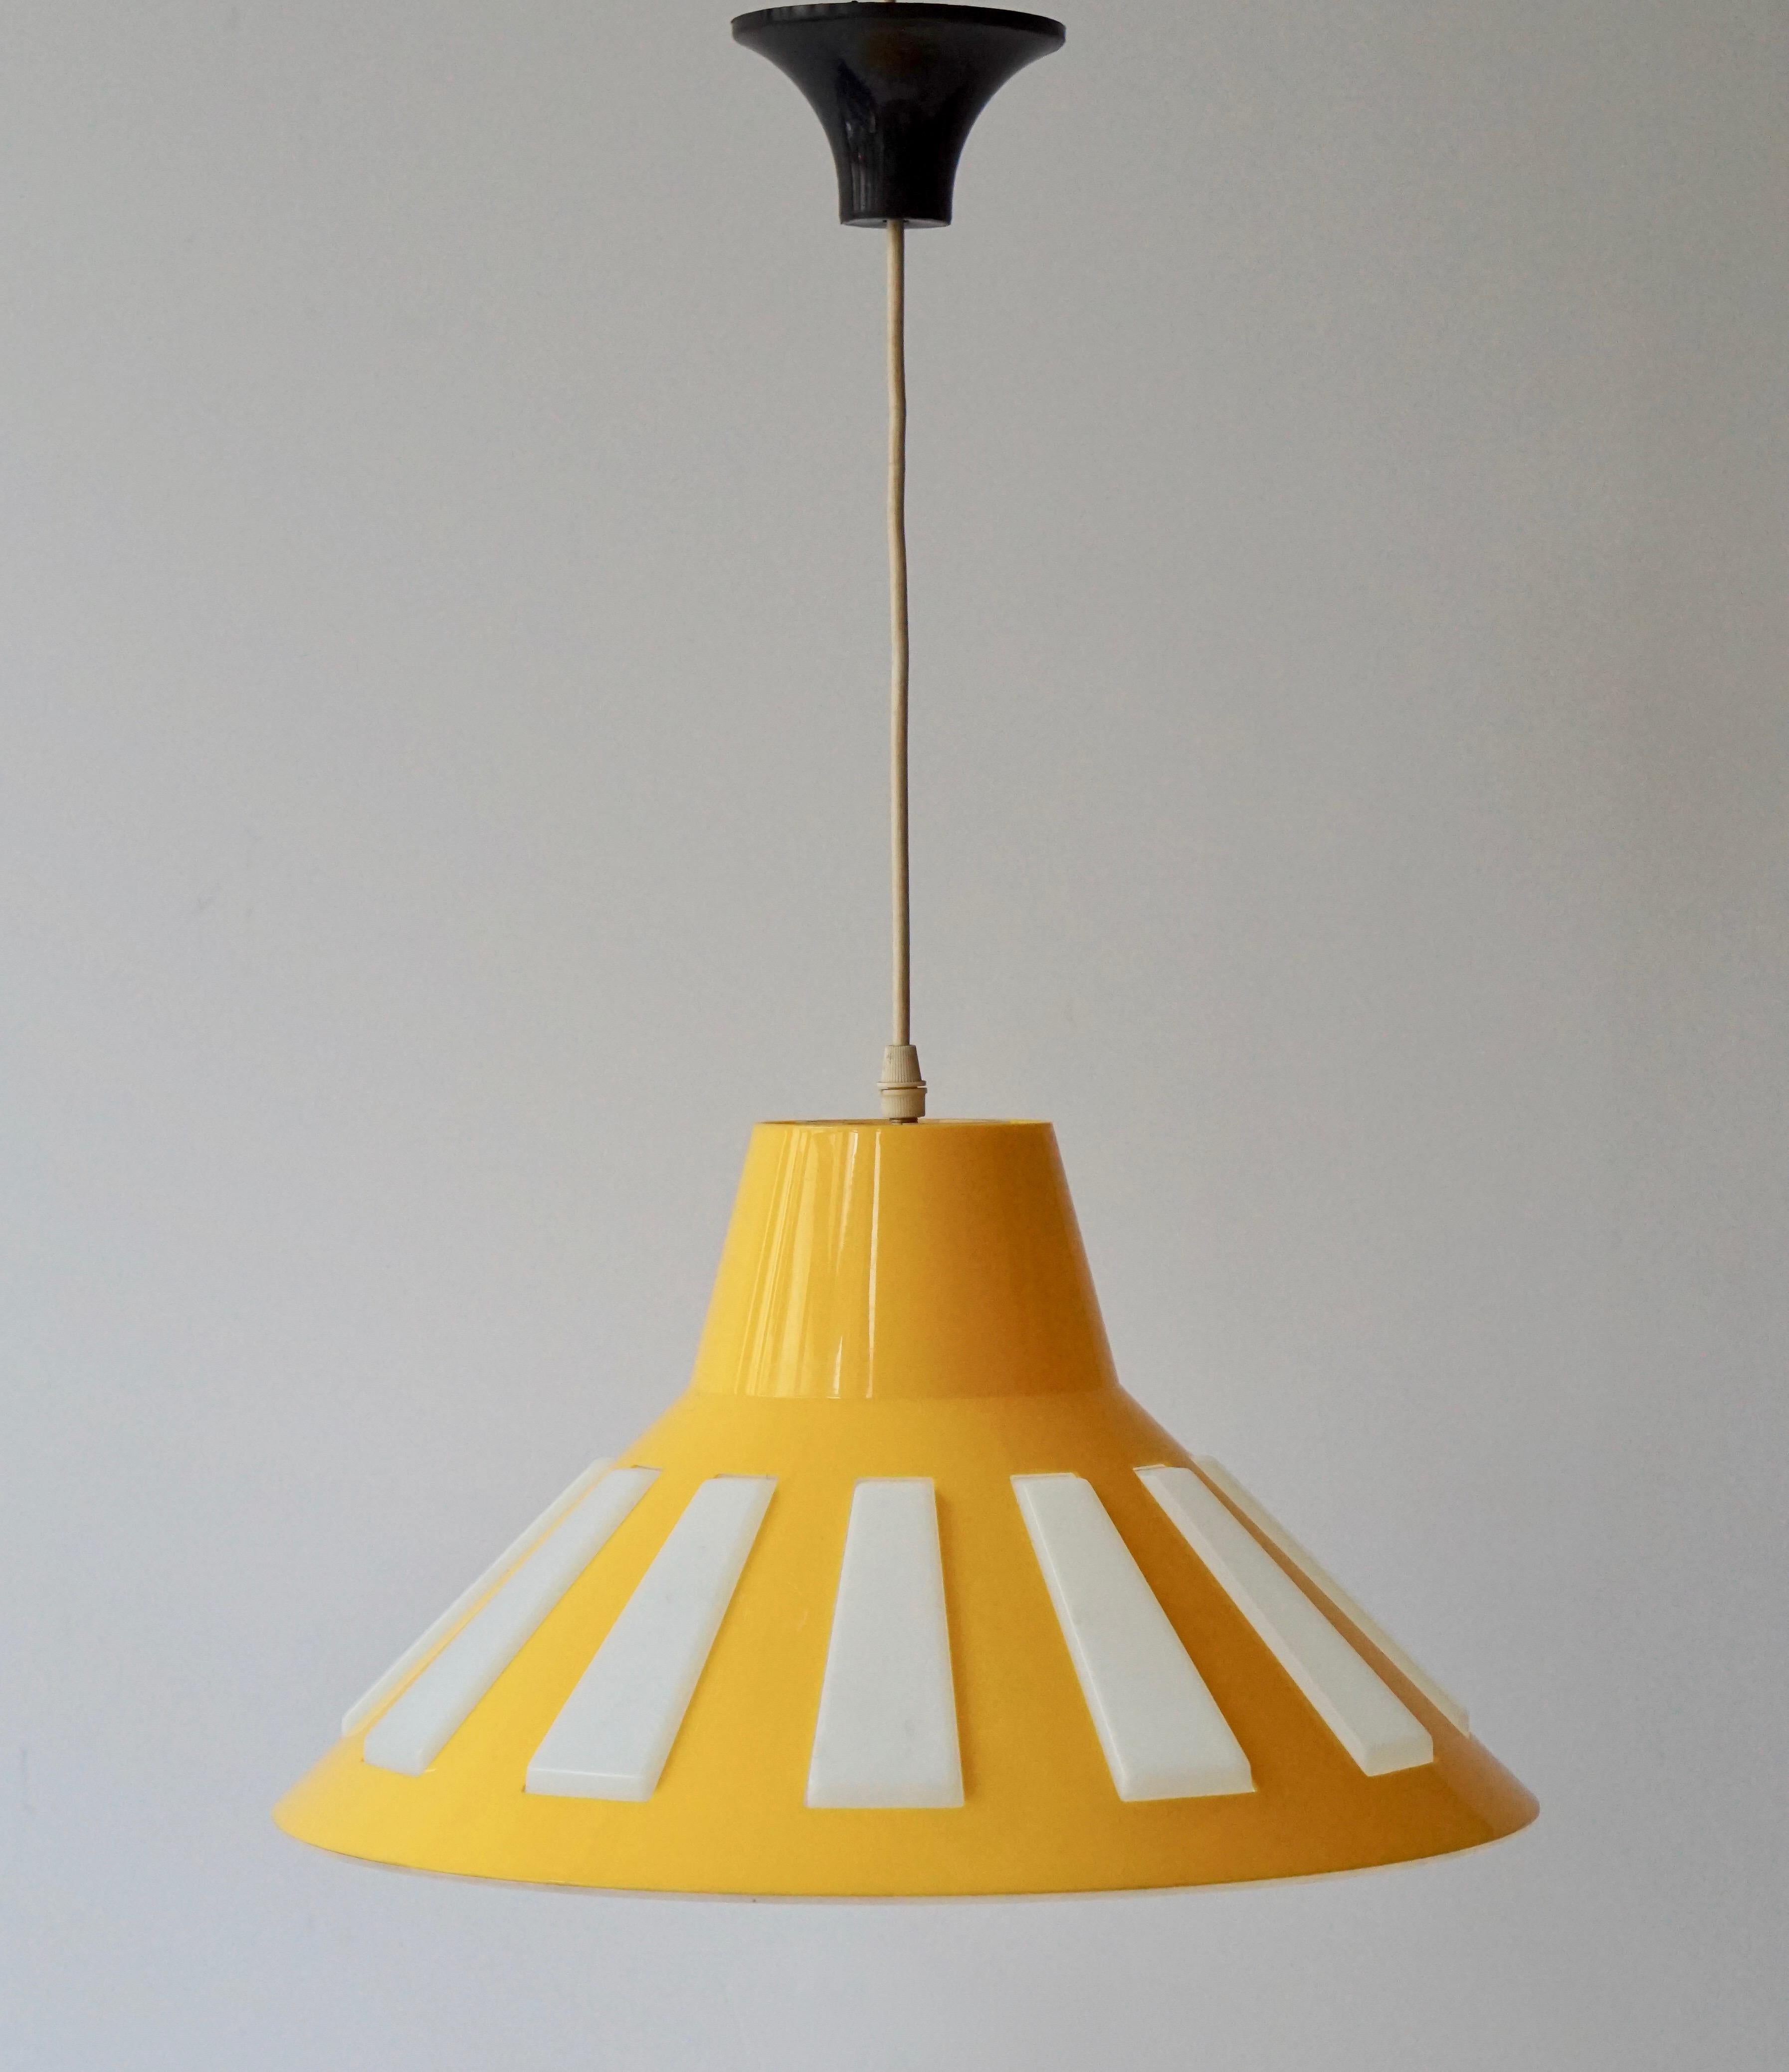 Mid-20th Century Italian Pendant Lights In Good Condition For Sale In Antwerp, BE